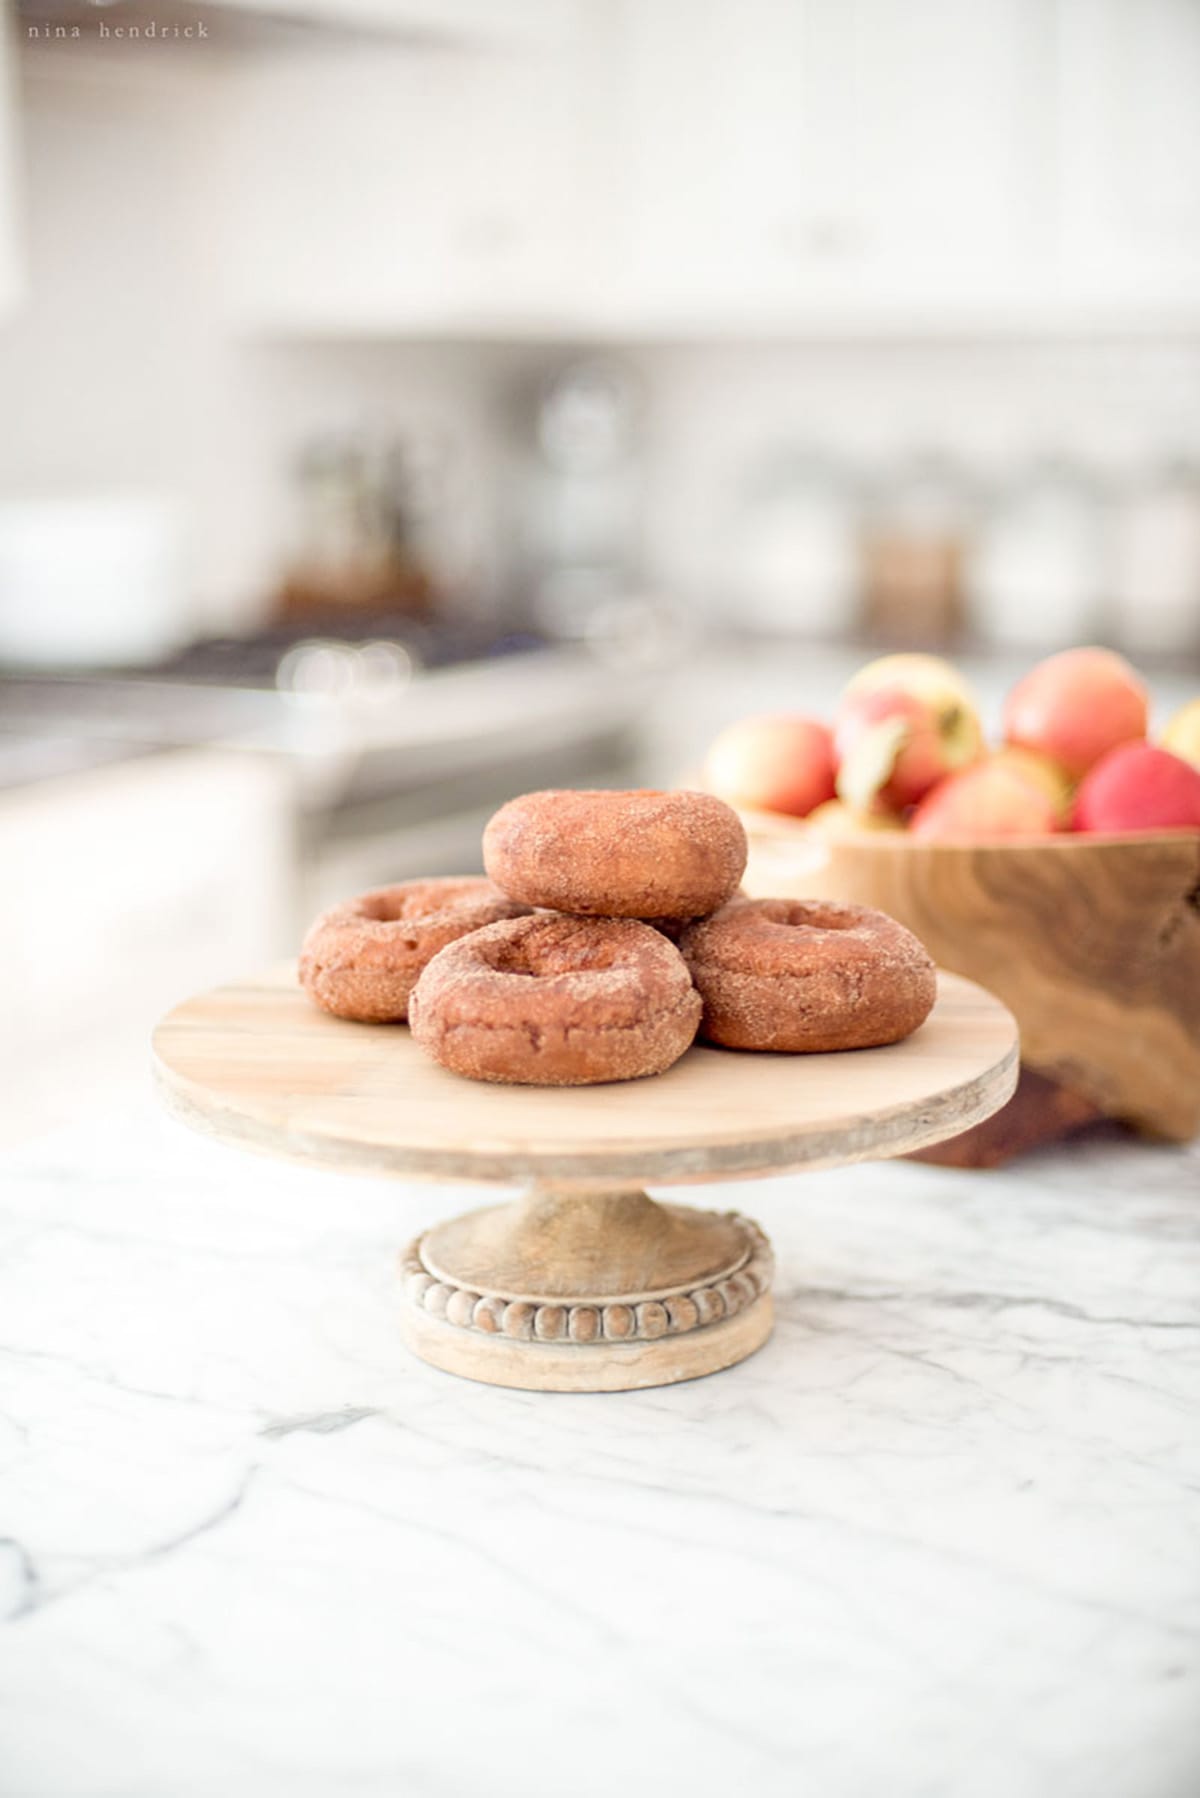 Apple cider donuts on a wooden plate in the kitchen.